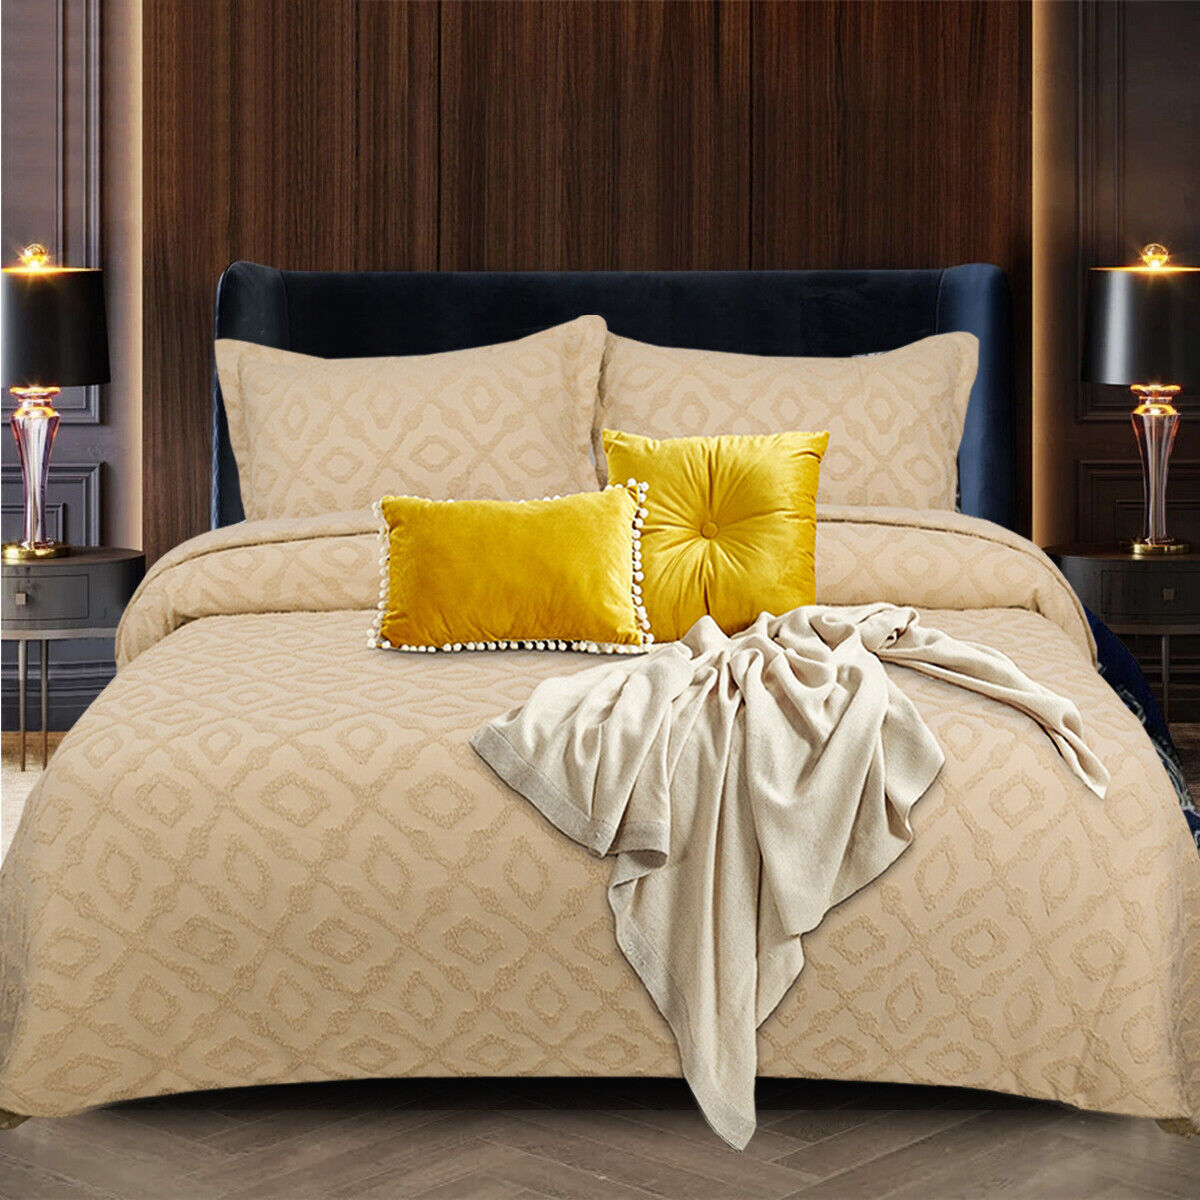 3 Piece Embossed Quilted Bedspread Throw Single Double King Size Bedding Set